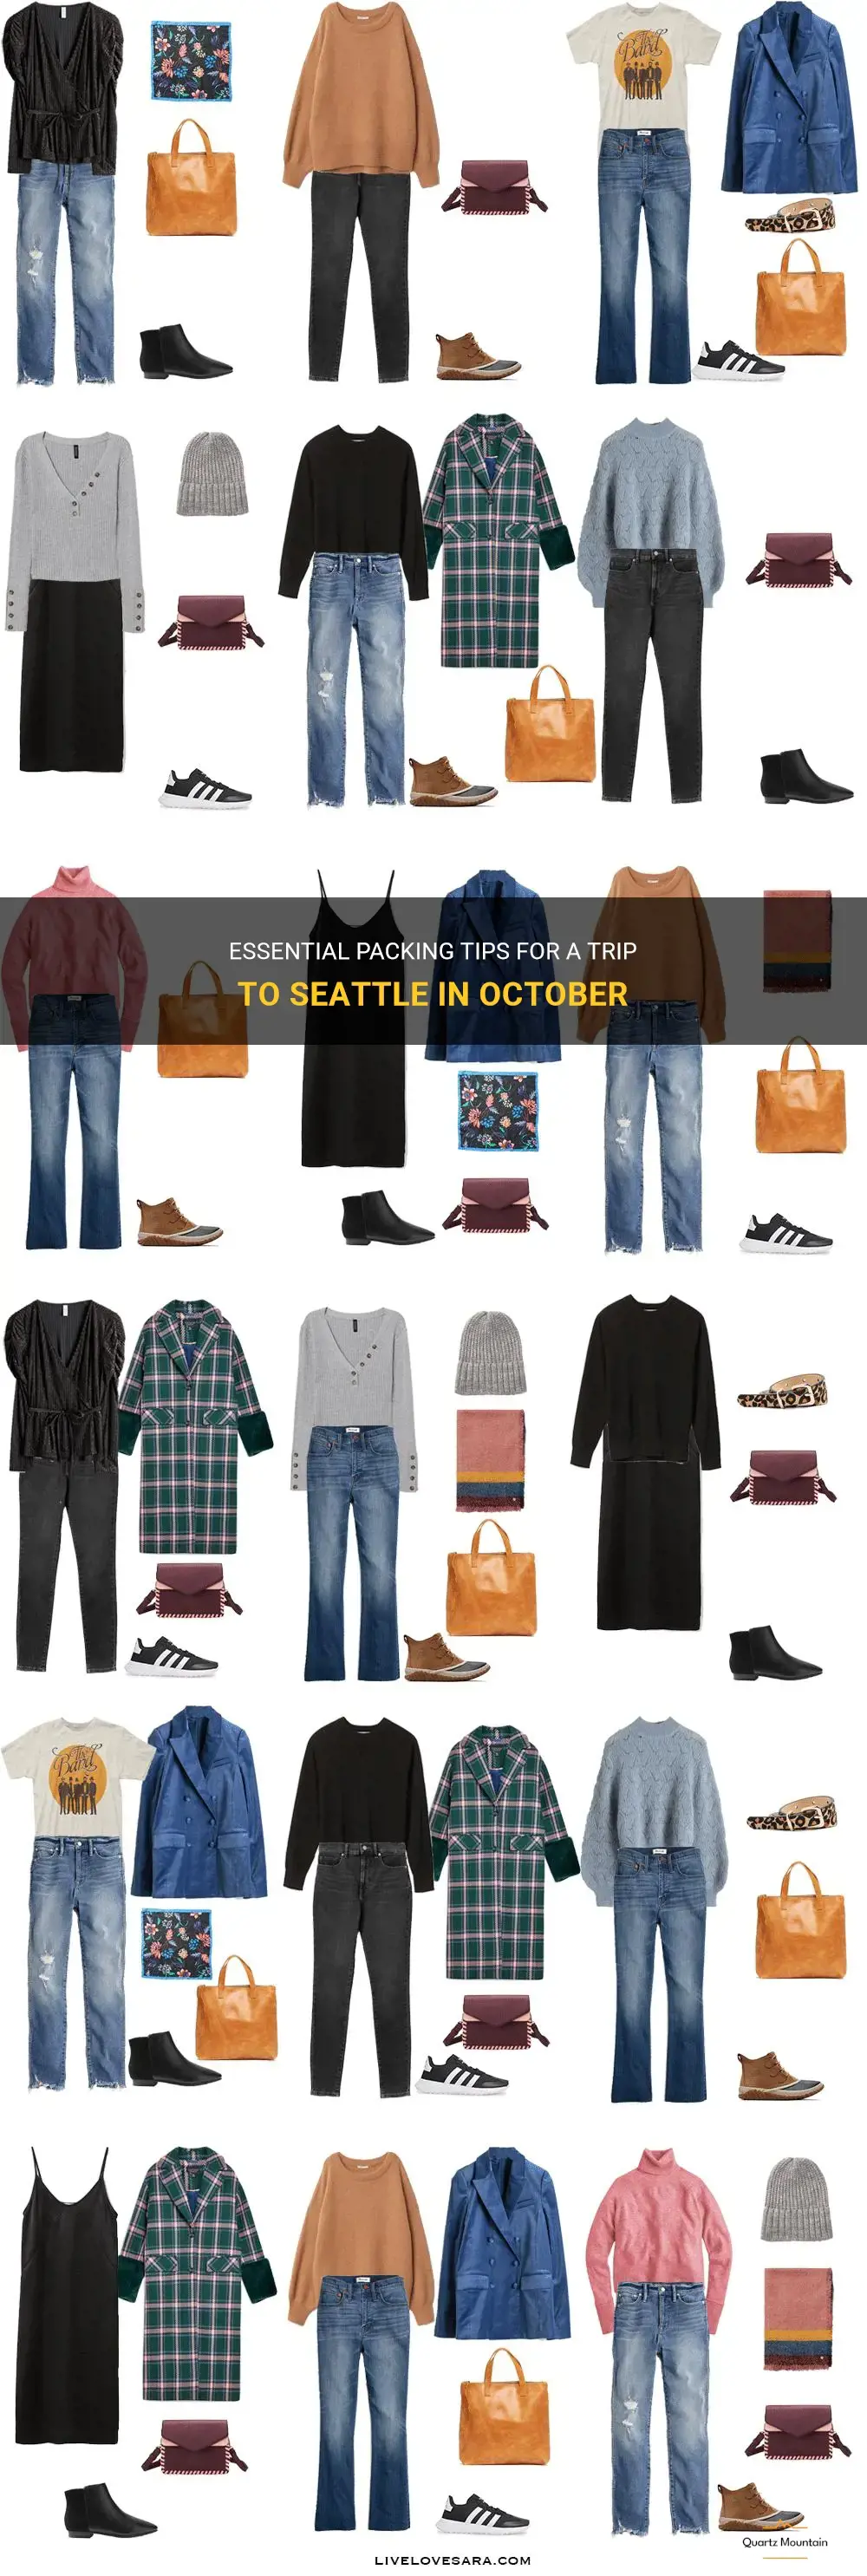 what to pack for trip to seattle in October